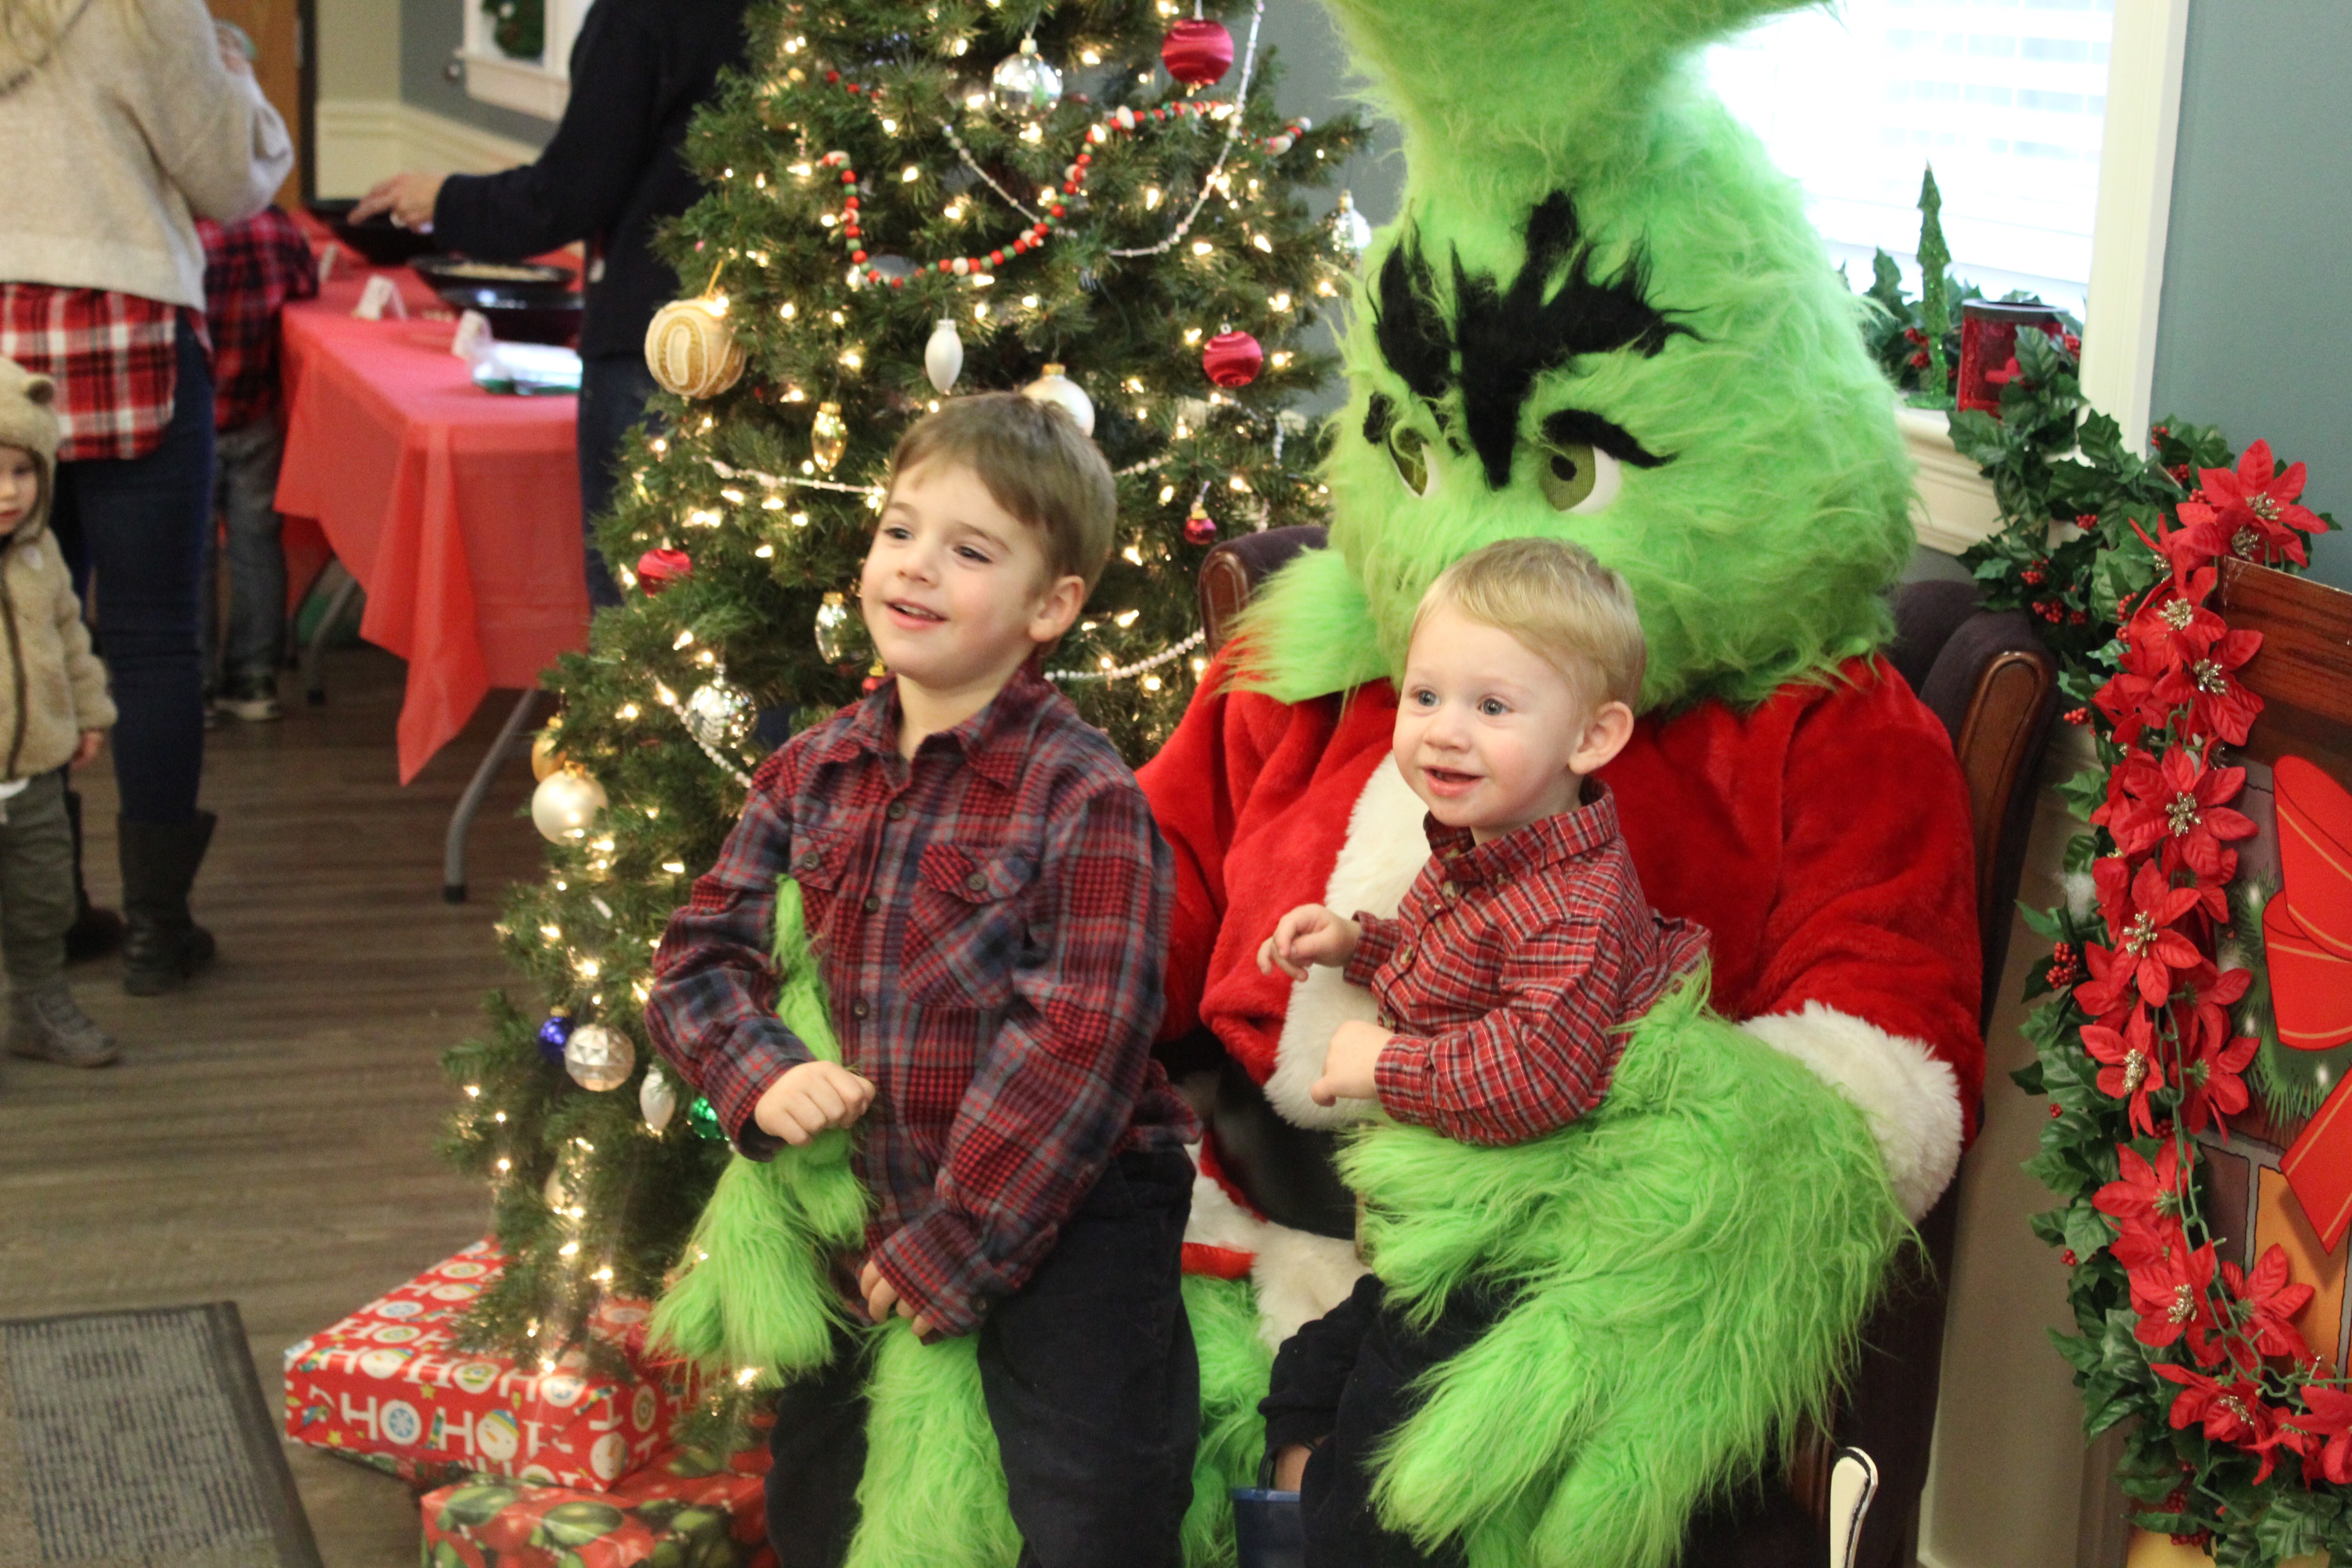 Have ‘Breakfast with the Grinch’ on Saturday